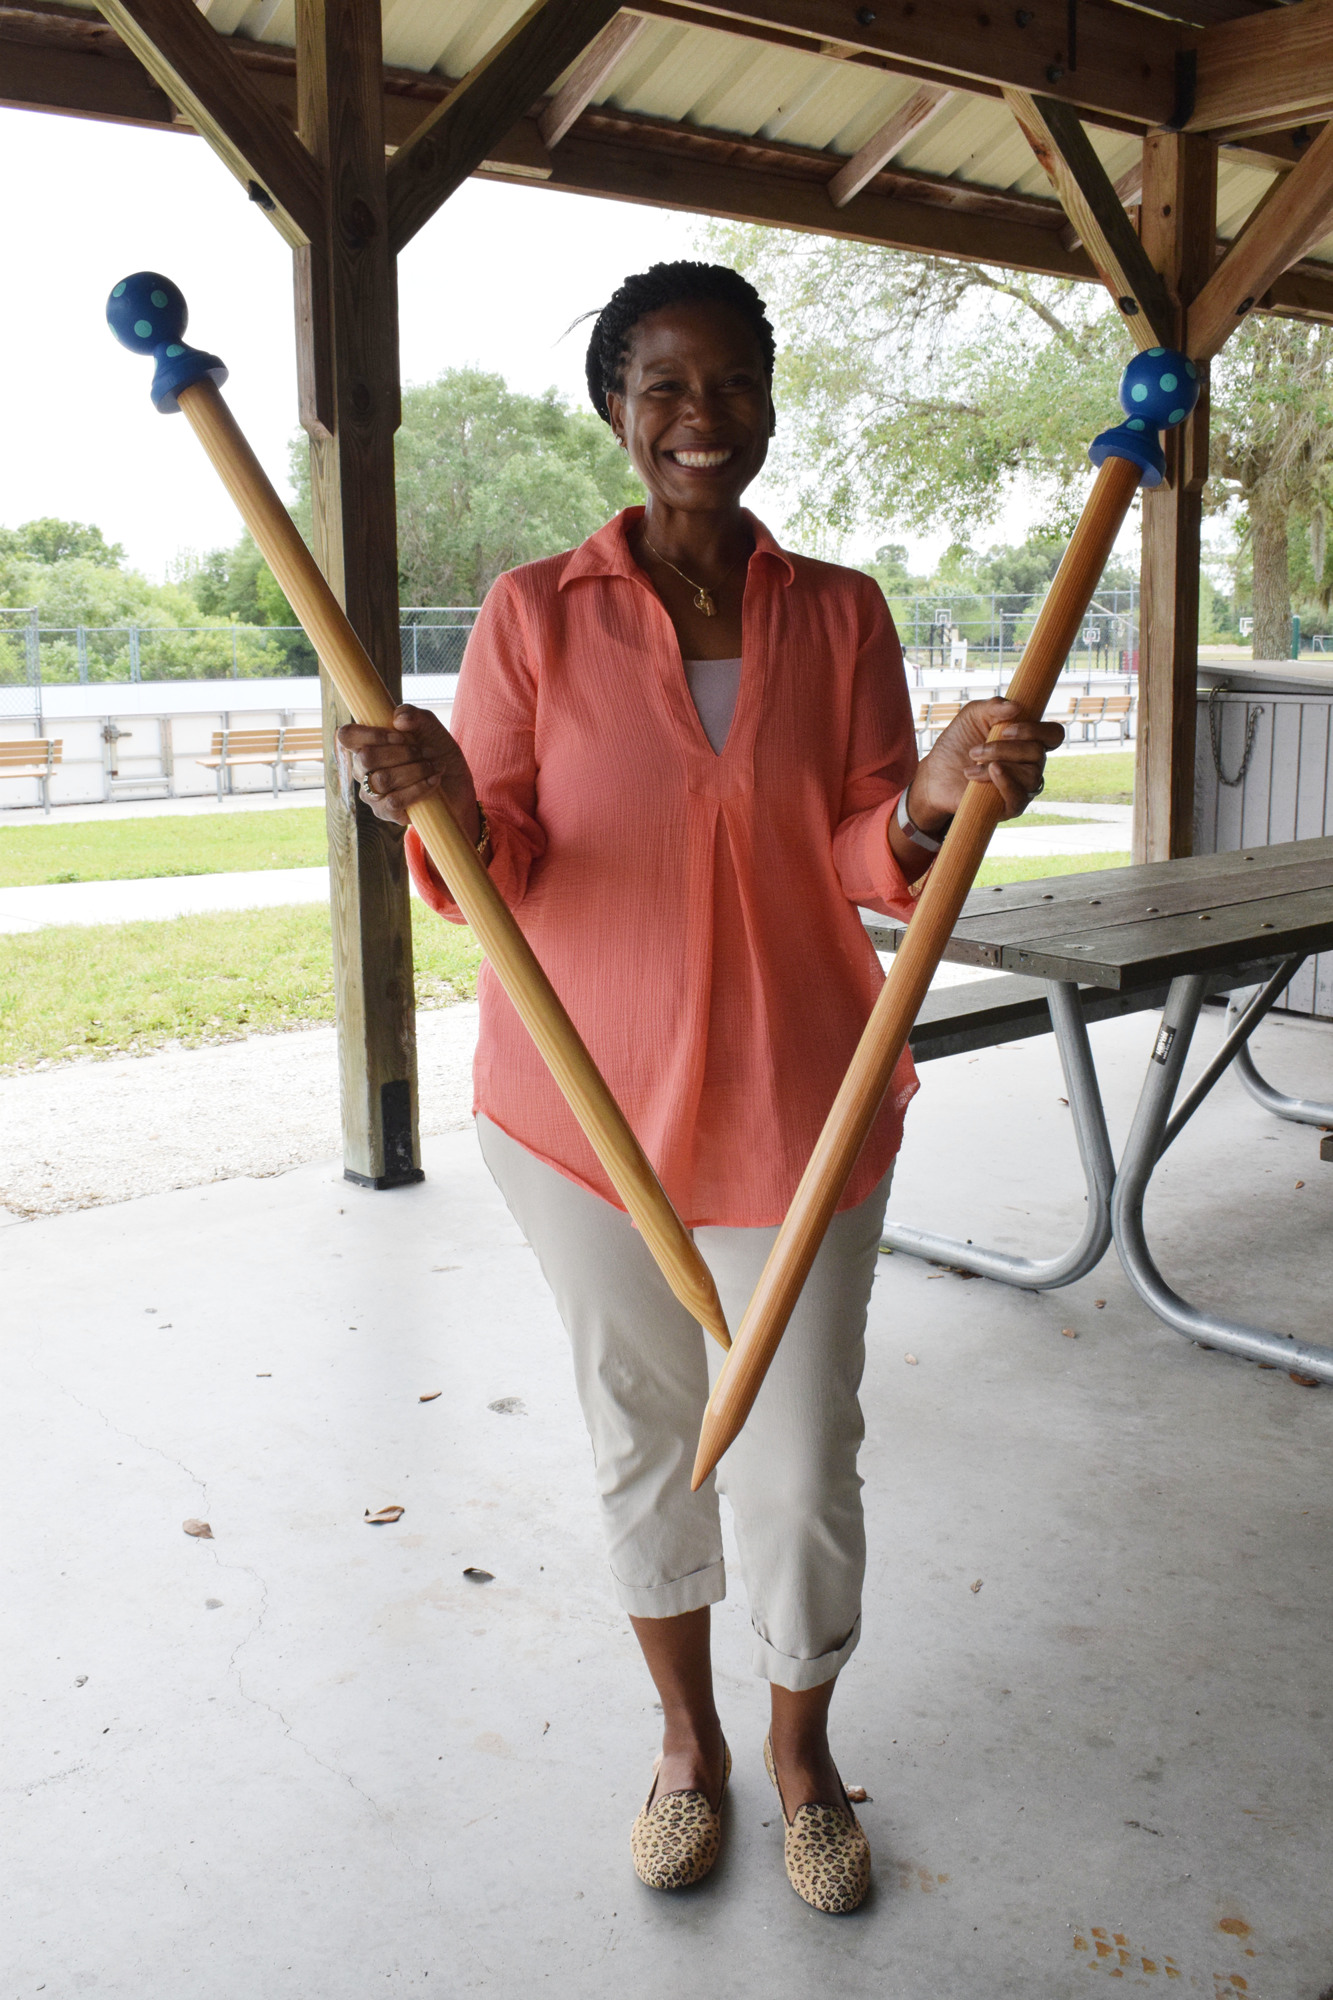 Country Club East's Shelly Hopkins uses her giant knitting needles to knit her large projects such as afghan blankets.